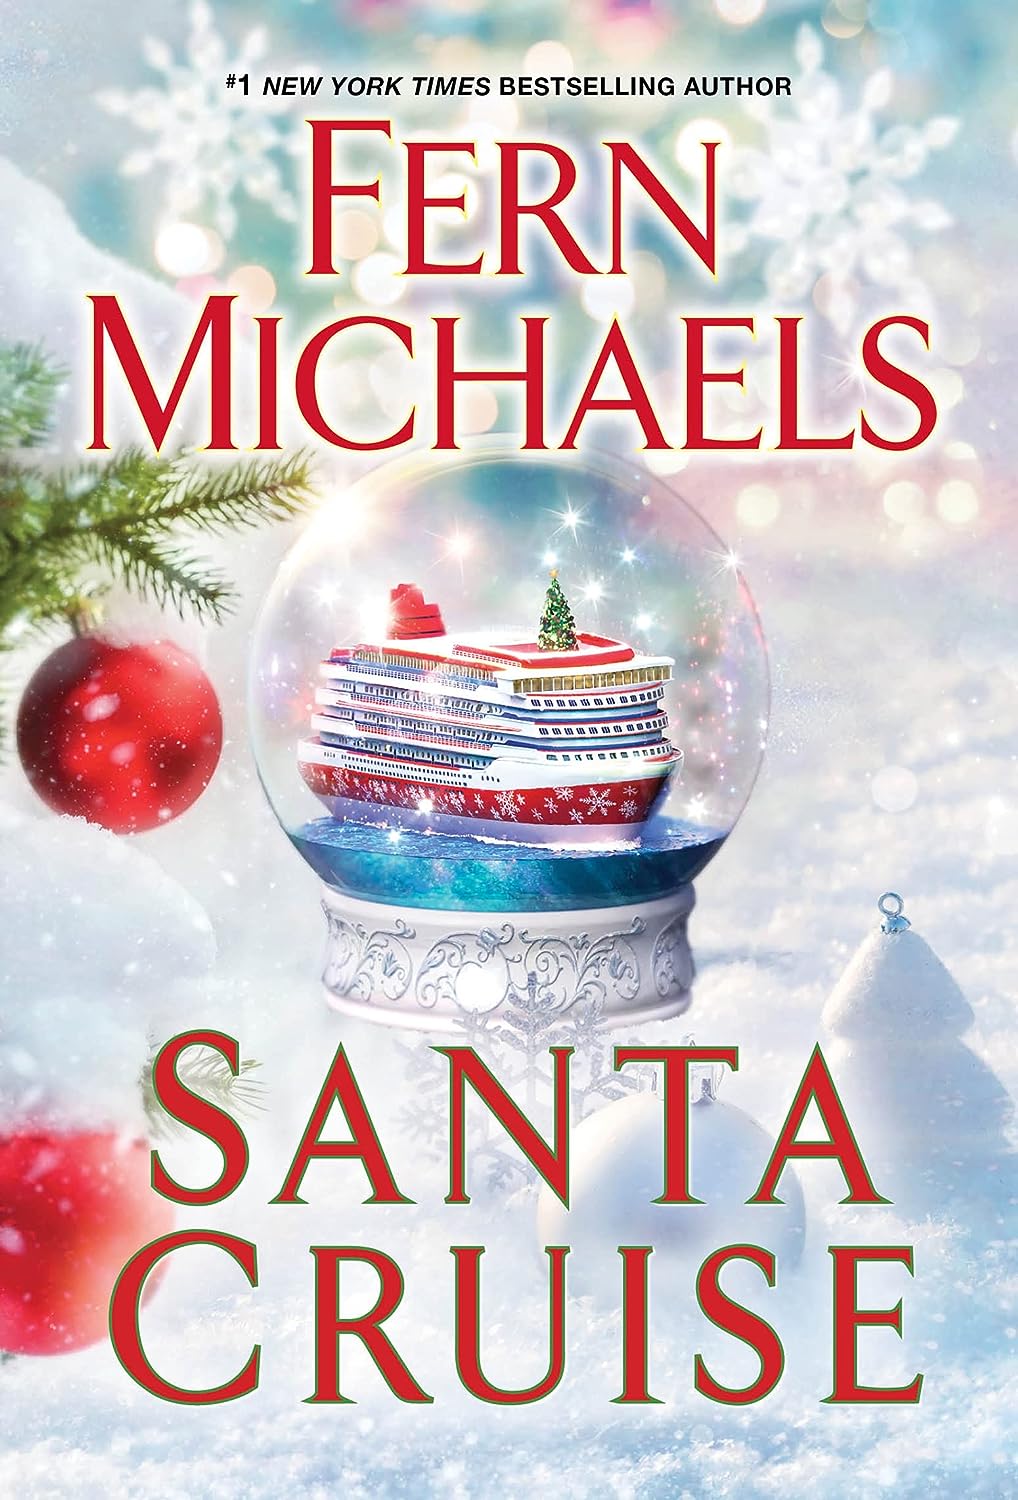 A Festive Voyage: A Review of 'Santa Cruise'